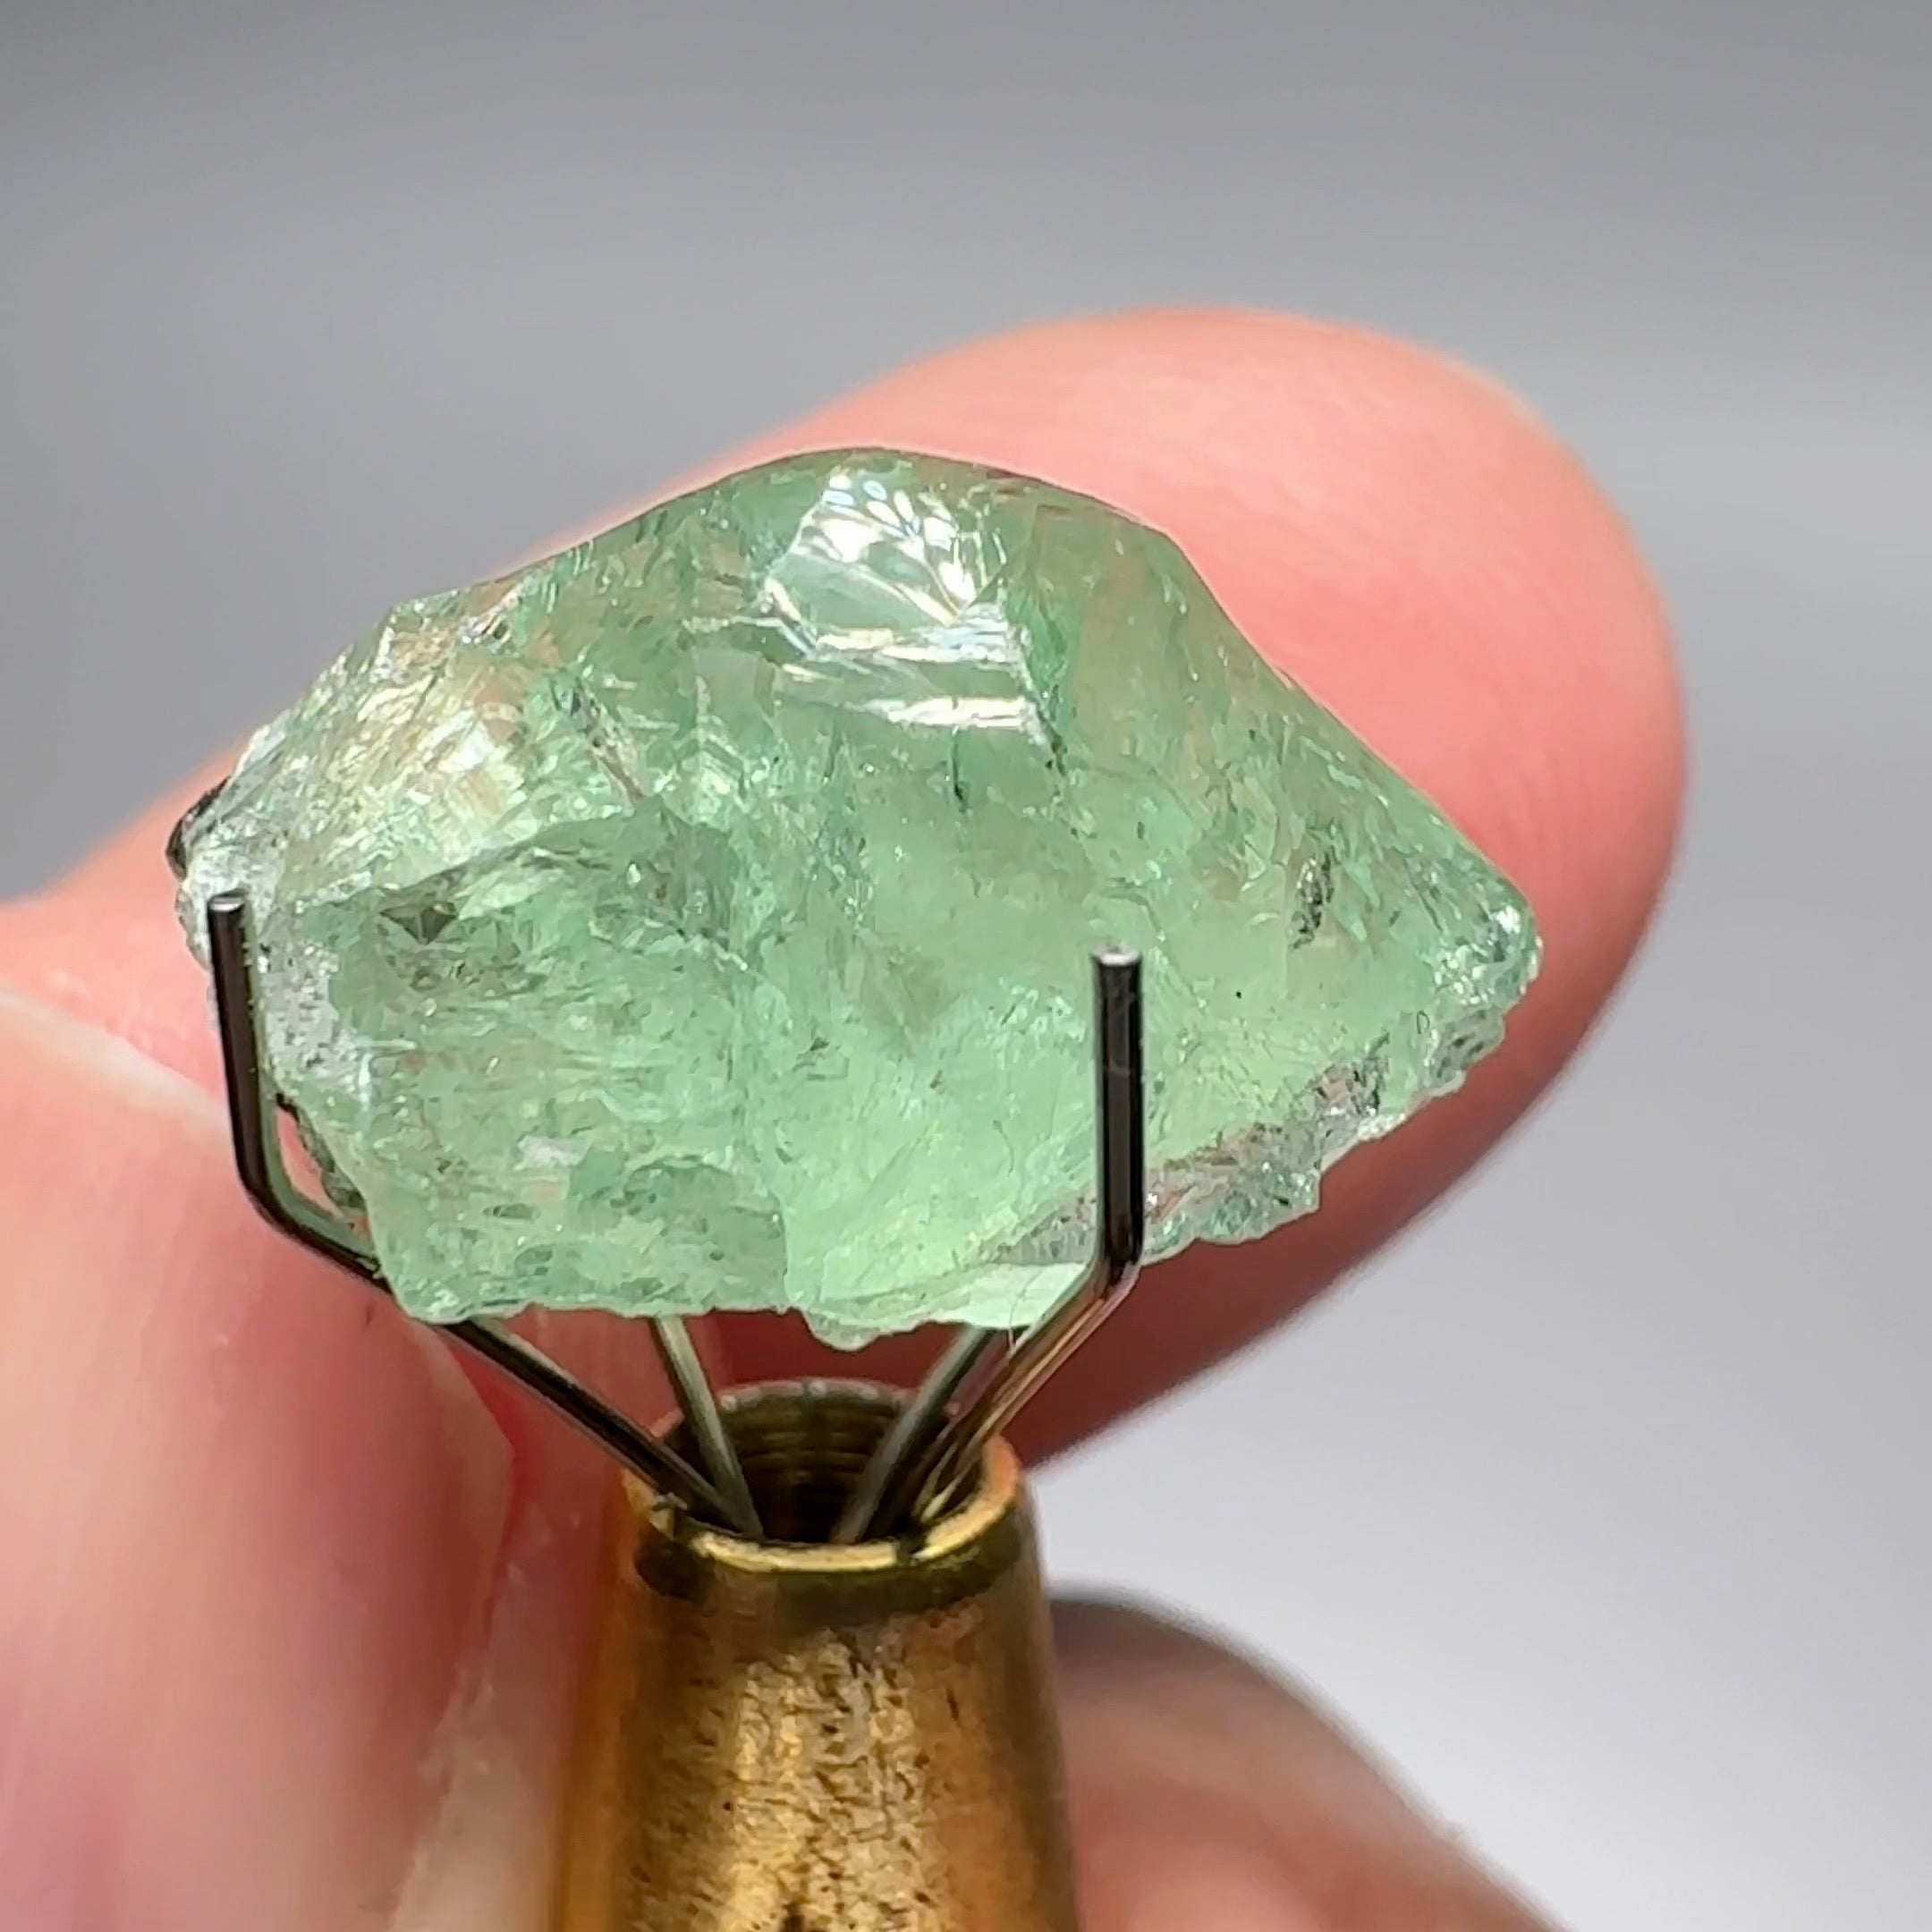 12.49ct Tsavorite Crystal Facetable Portions Inside/ also good for a cab, probably needs to be split in two, Tanzania, Untreated Unheated